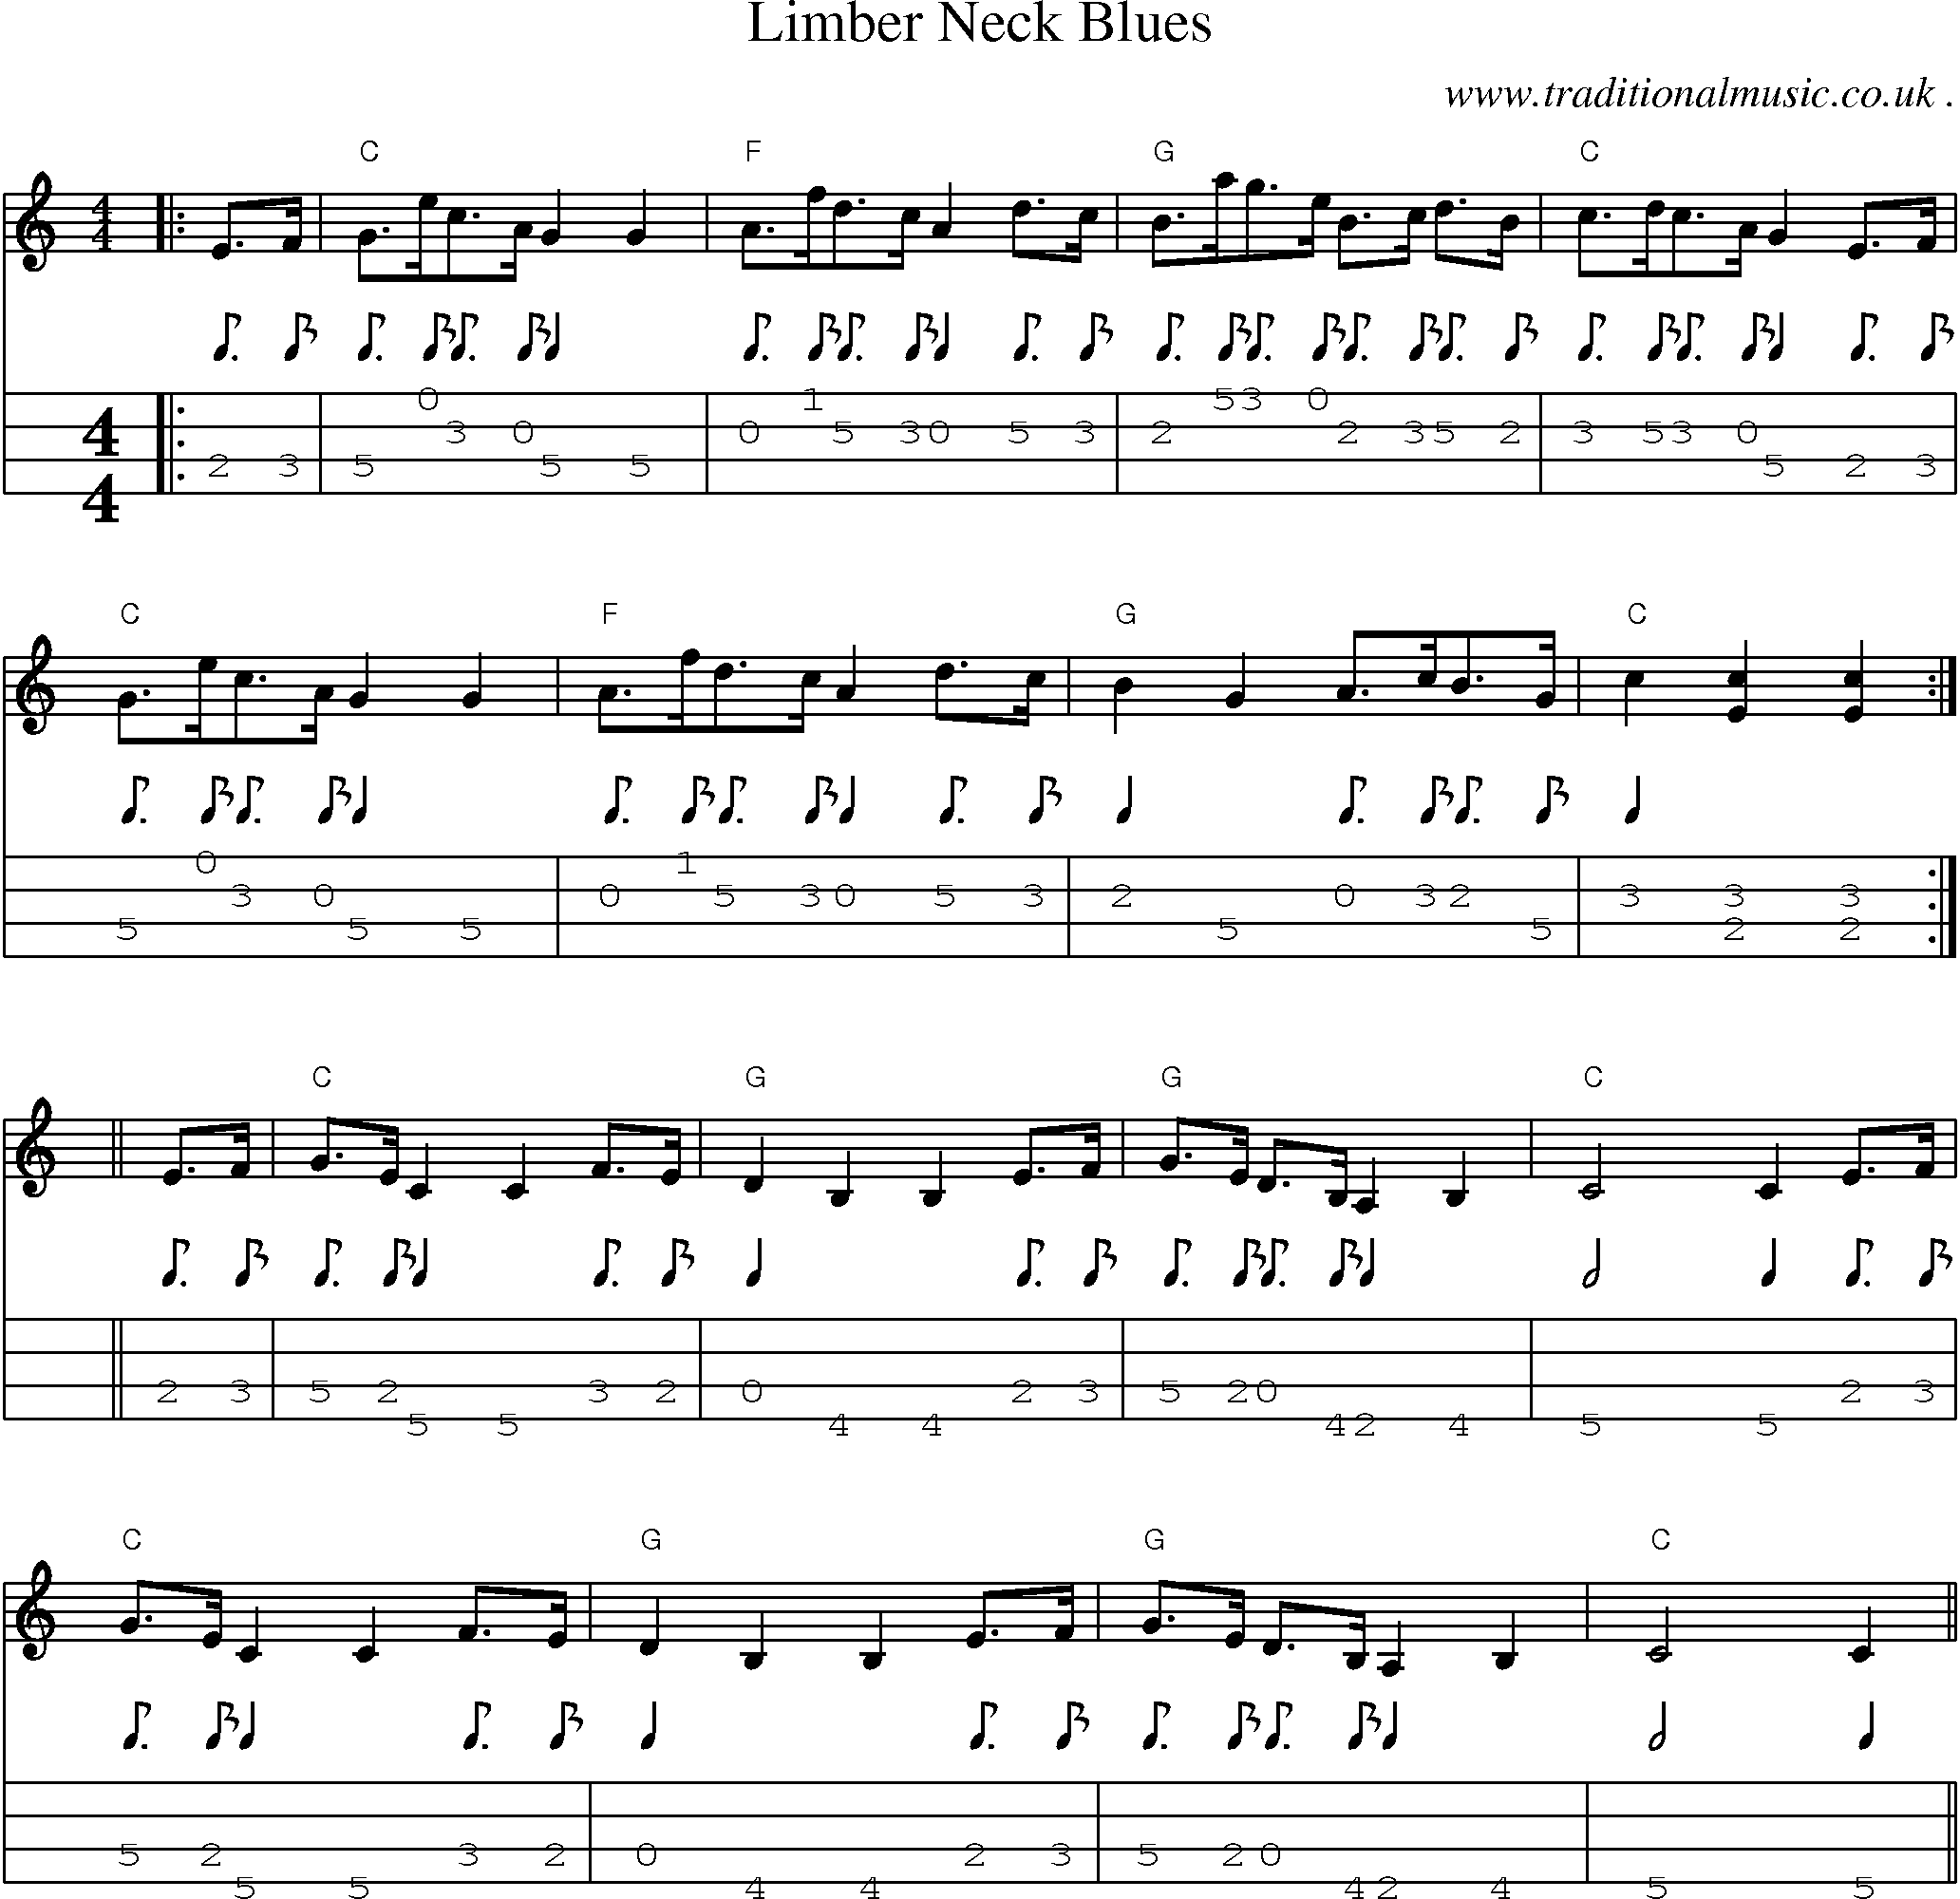 Music Score and Mandolin Tabs for Limber Neck Blues